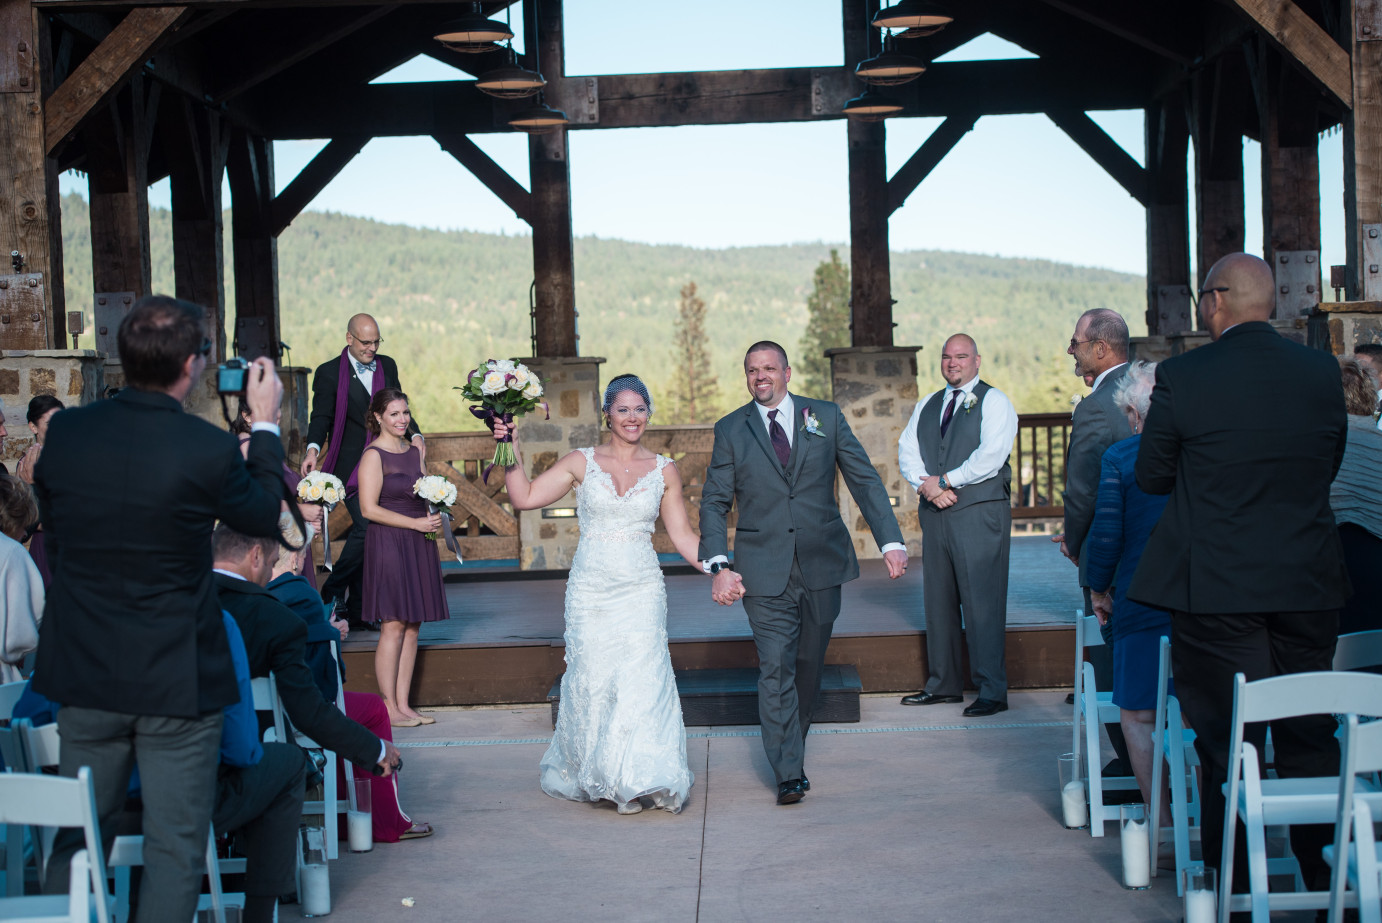 Wedding Day Planning and Tips Swiftwater Cellar wedding bride and groom after ceremony photo